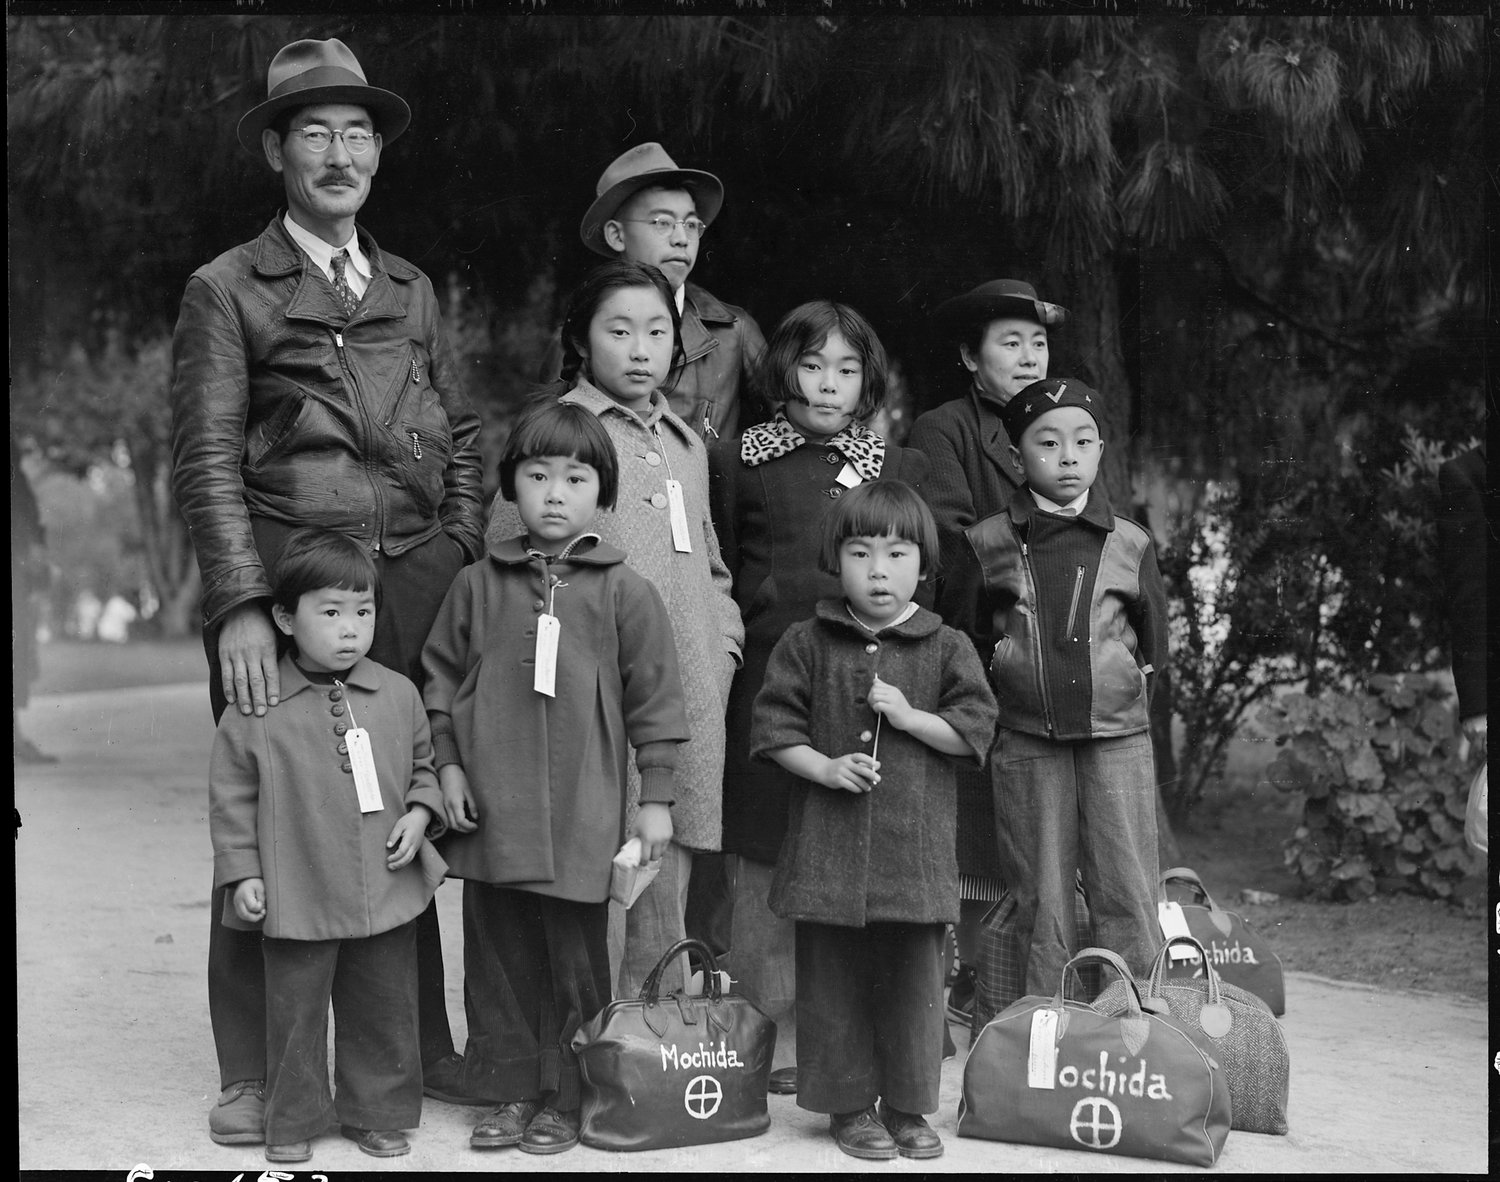 Original caption: Hayward, California. Members of the Mochida family awaiting evacuation bus. Identification tags are used to aid in keeping the family unit intact during all phases of evacuation. Mochida operated a nursery and five greenhouses on a two-acre site in Eden Township. He raised snapdragons and sweet peas. Evacuees of Japanese ancestry will be housed in War Relocation Authority centers for the duration.